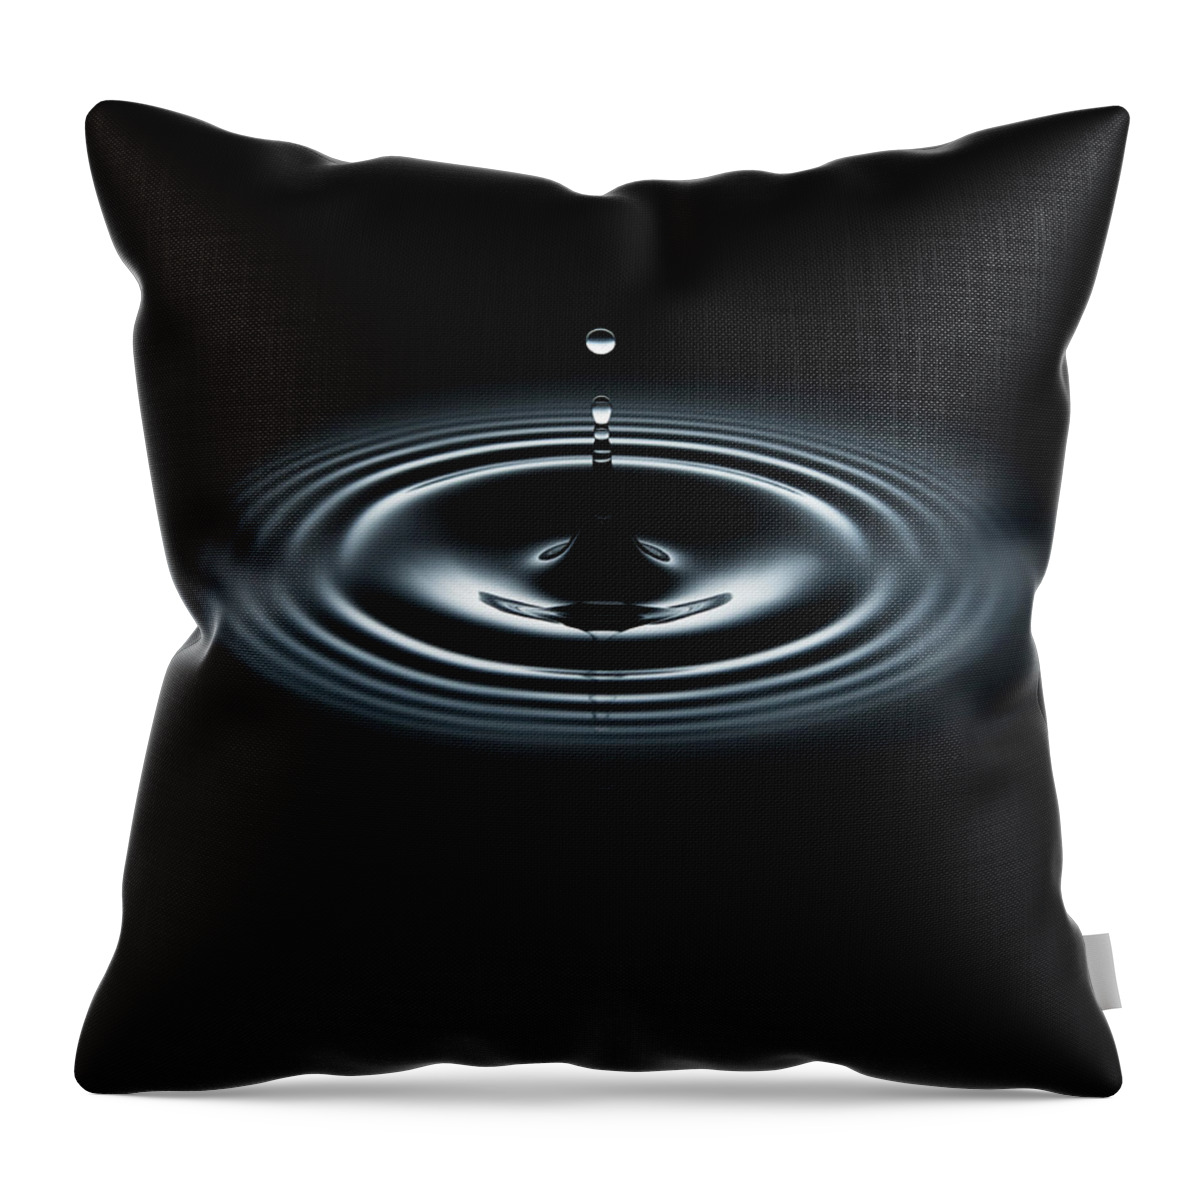 Black Background Throw Pillow featuring the photograph Water Drop Making Ripple On Black by Biwa Studio